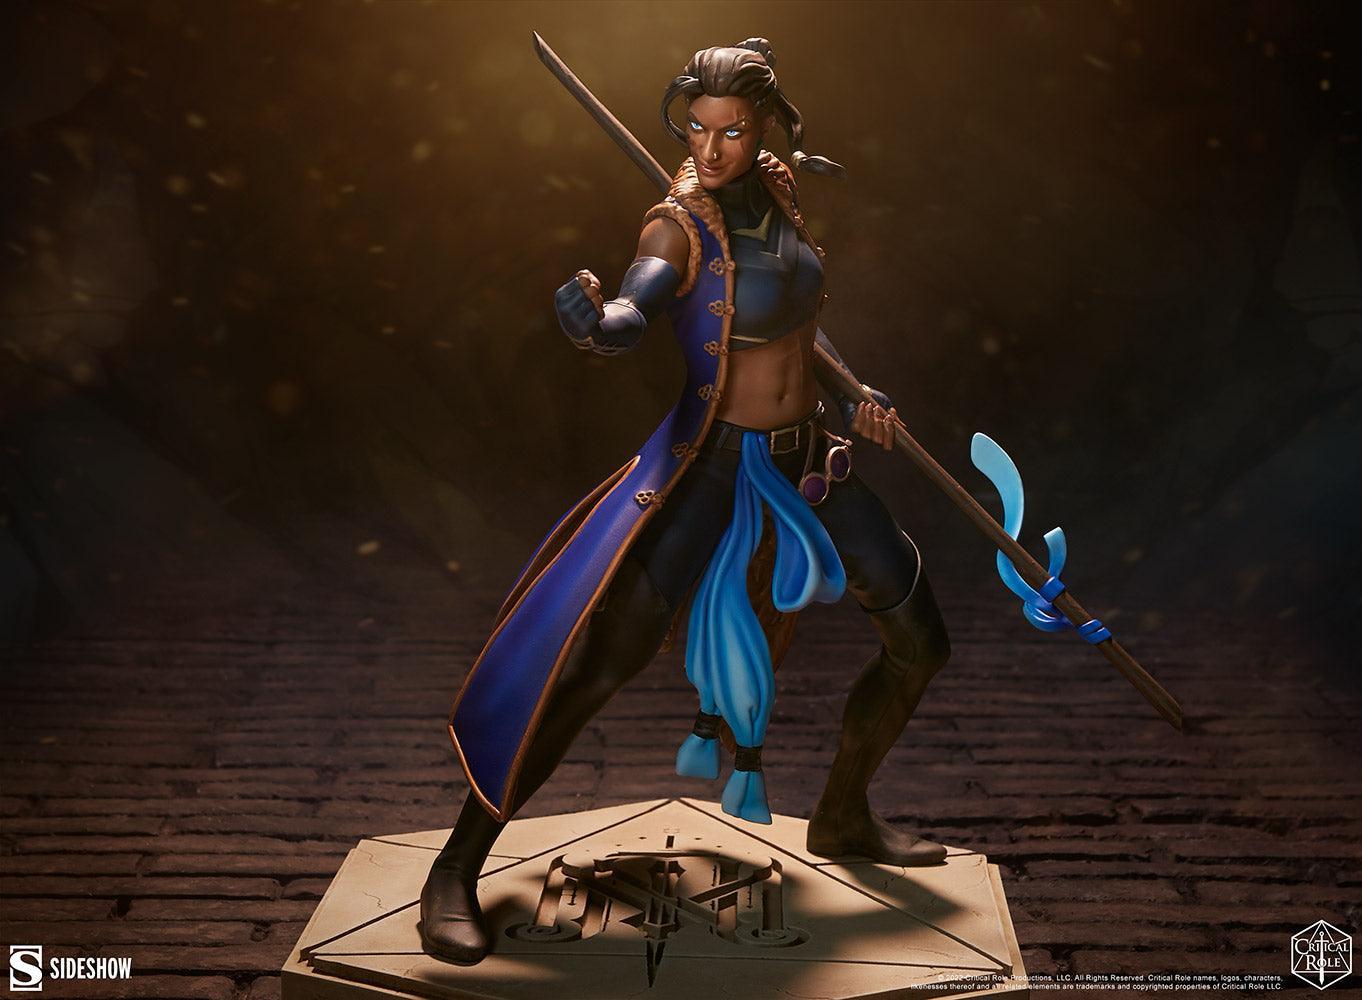 SID200609 Critical Role - Beau Mighty Nein Statue - Sideshow Collectibles - Titan Pop Culture